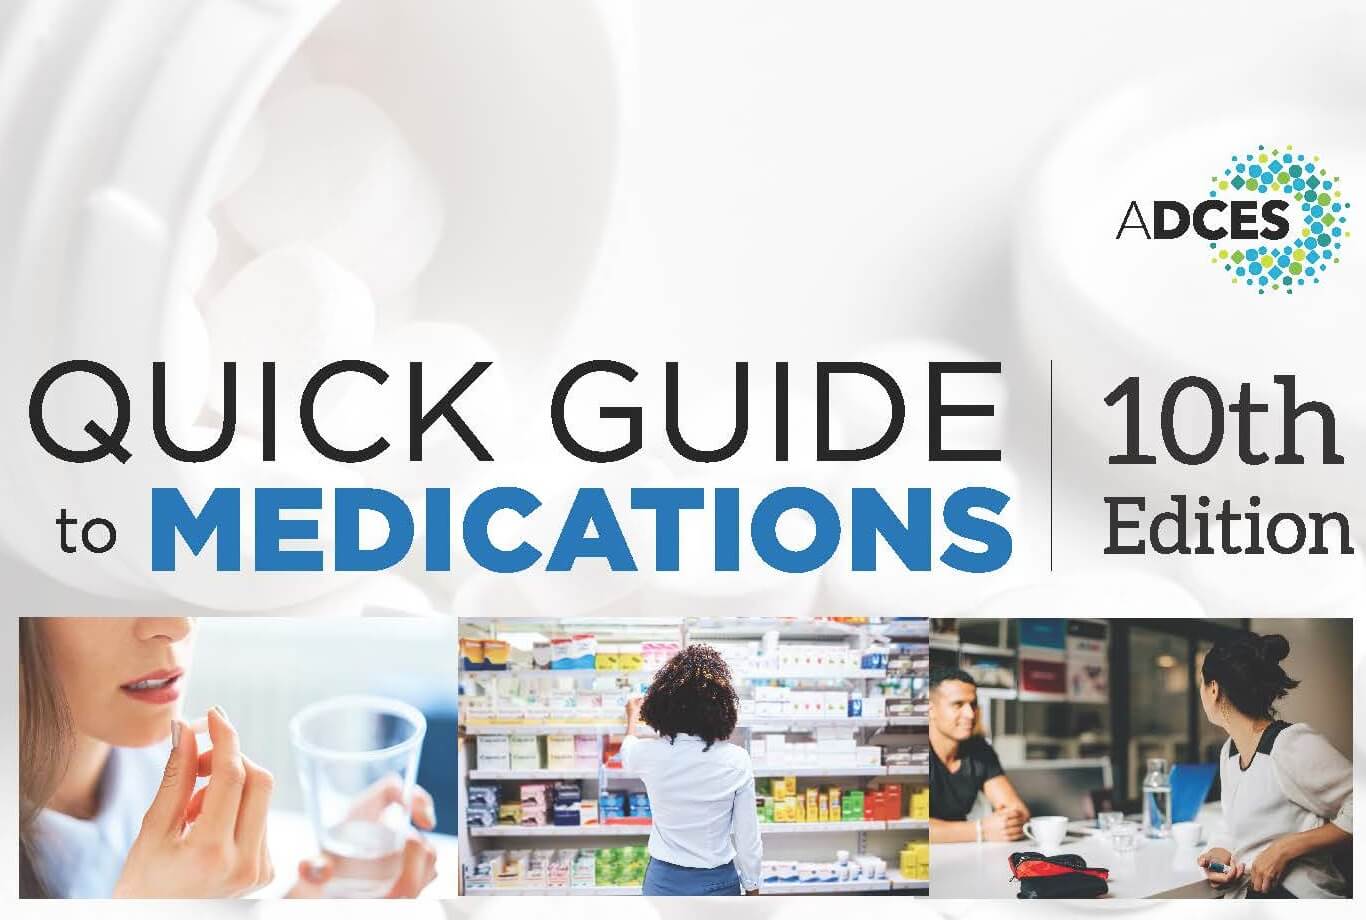 Quick Guide to Medications-9th edition